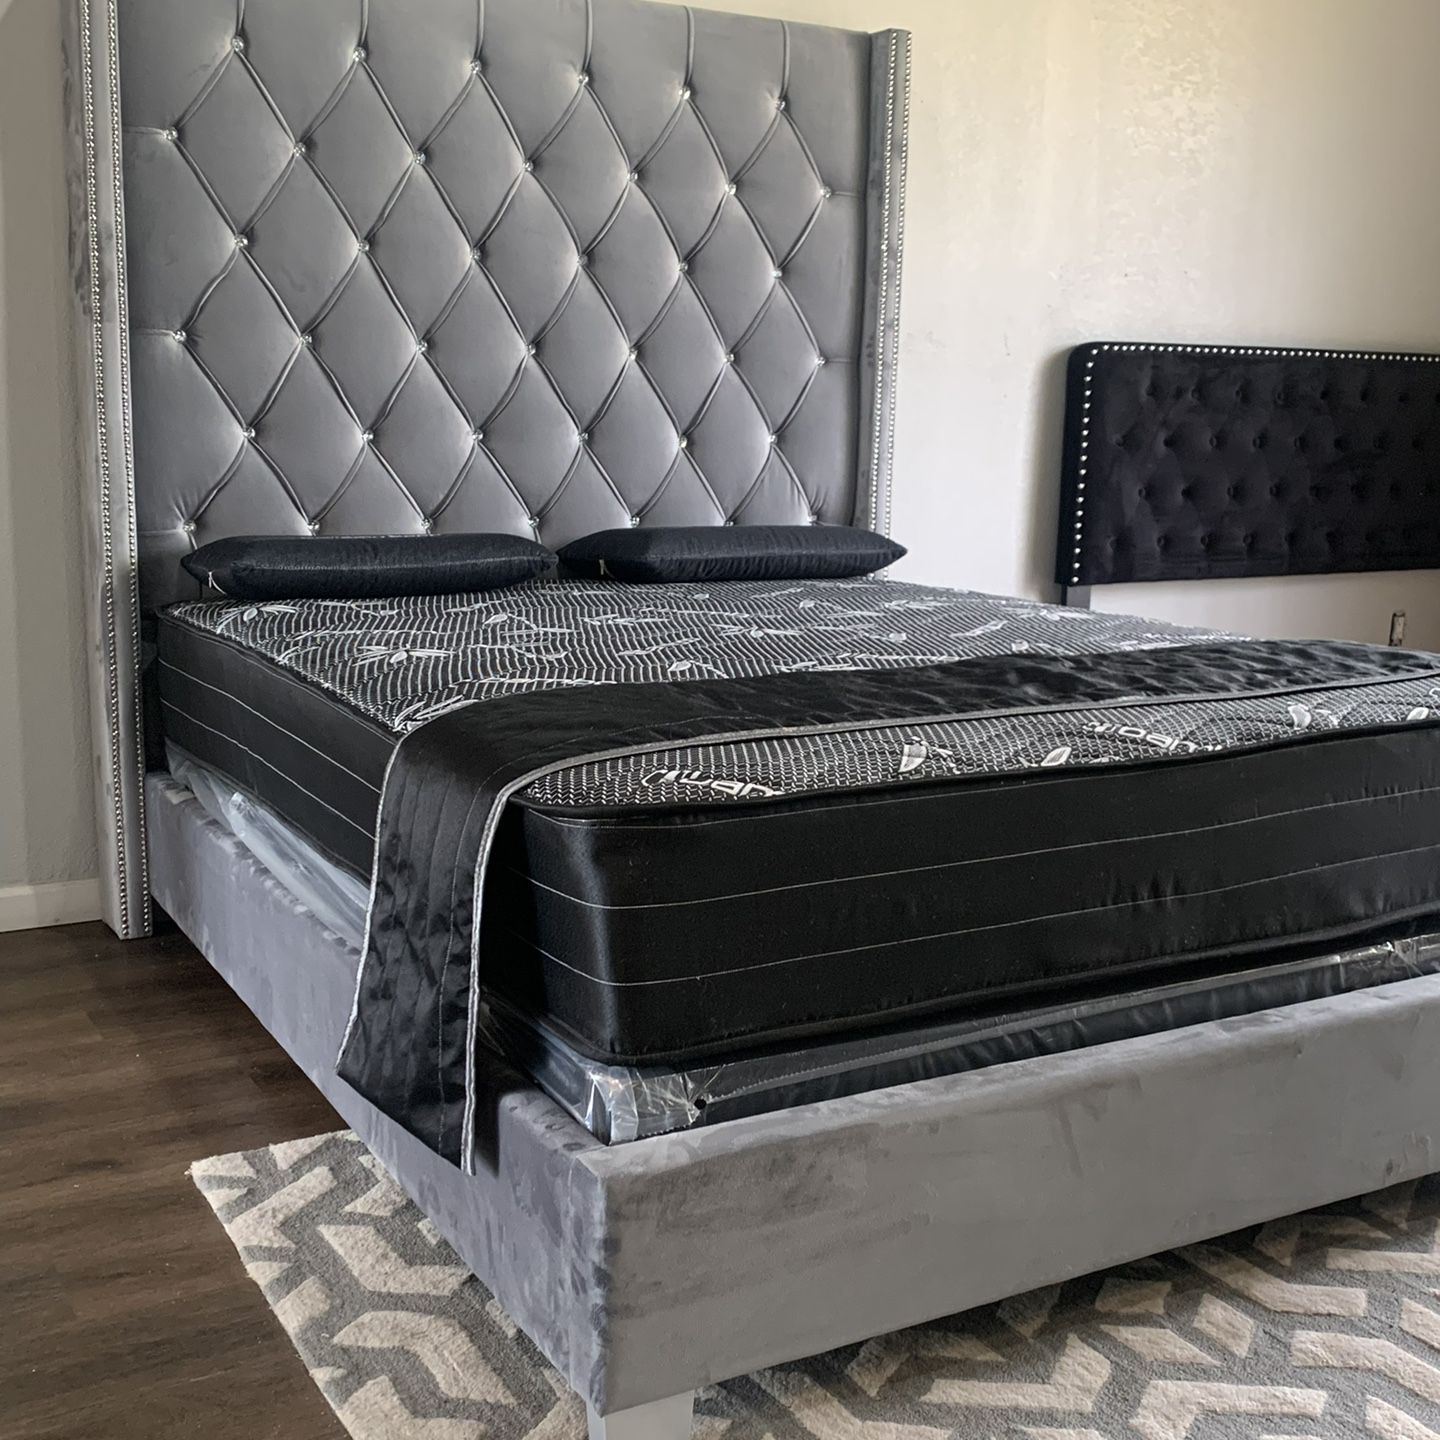 King & Queen Sizes Available / Complete Bed Frame With New Mattress And Box Spring 